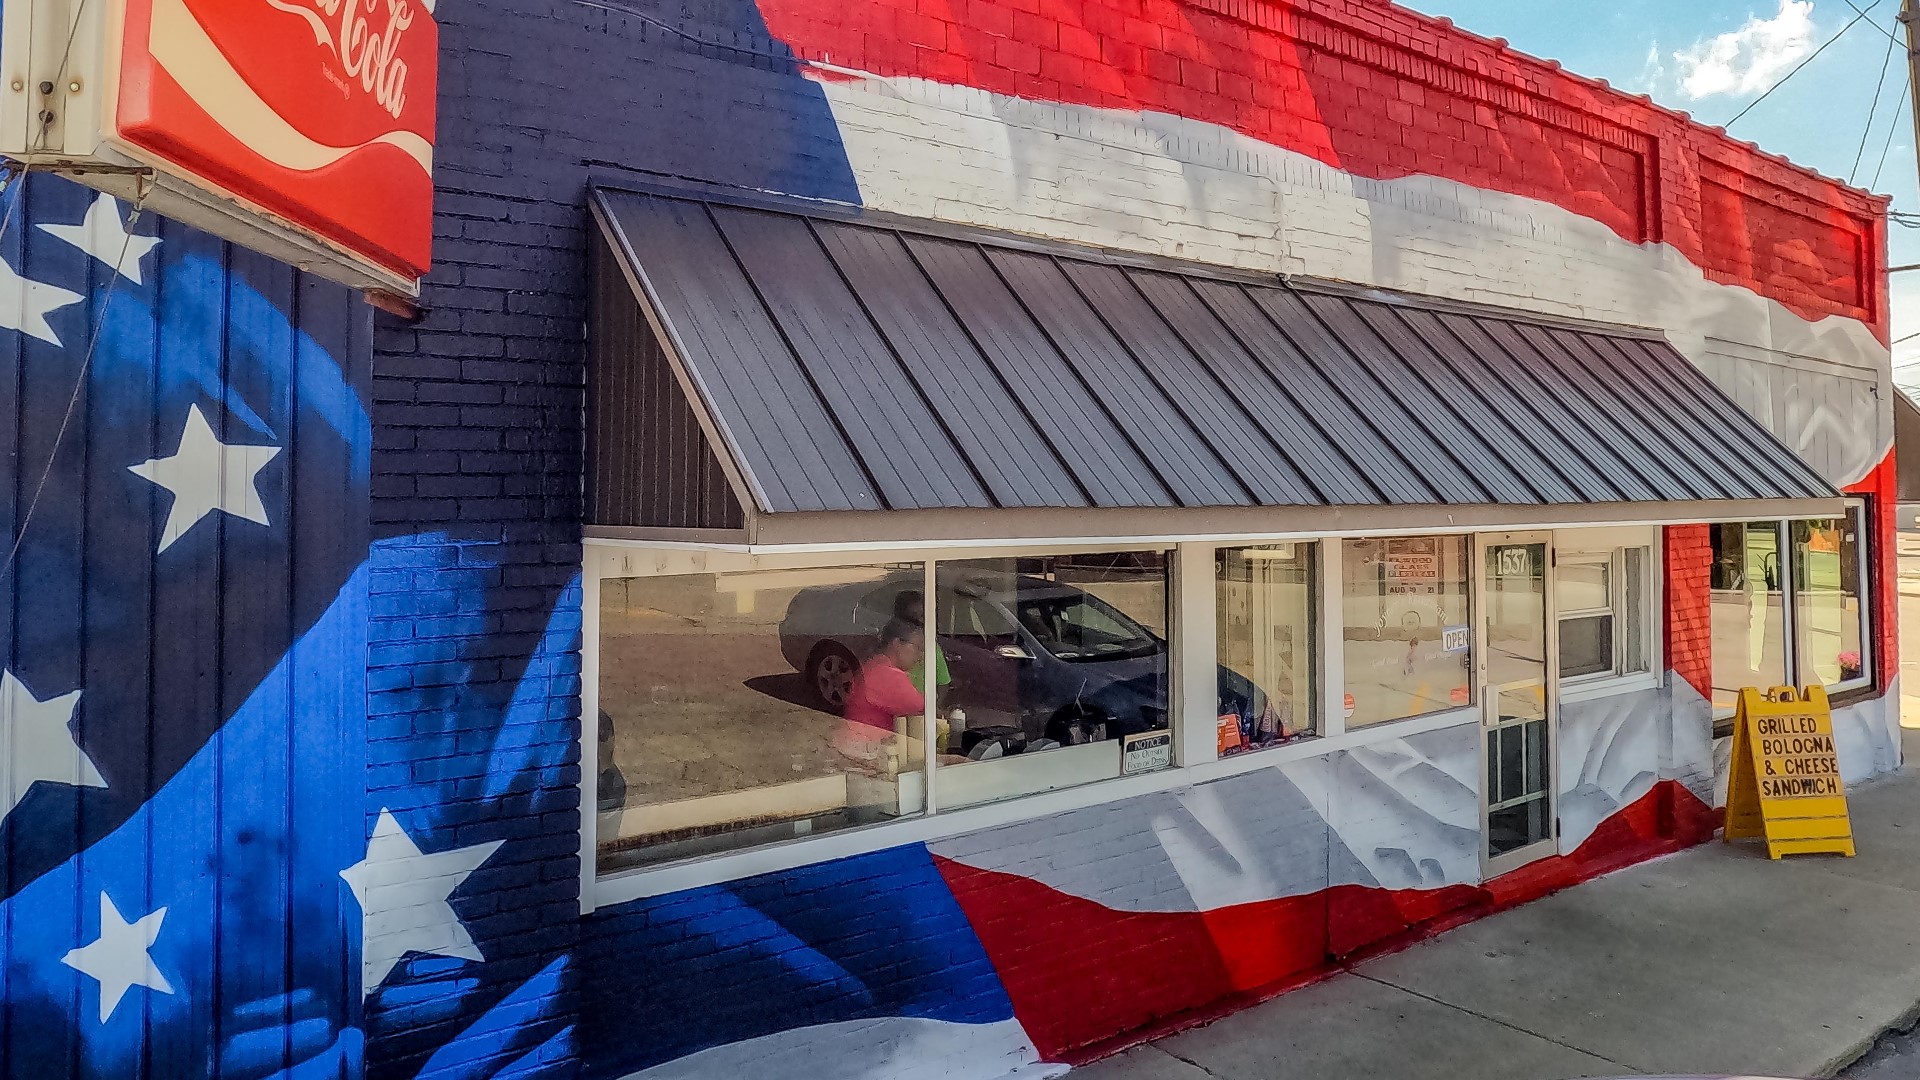 An American flag mural is uniting the town of Elwood. Lauren Kostiuk has the story.